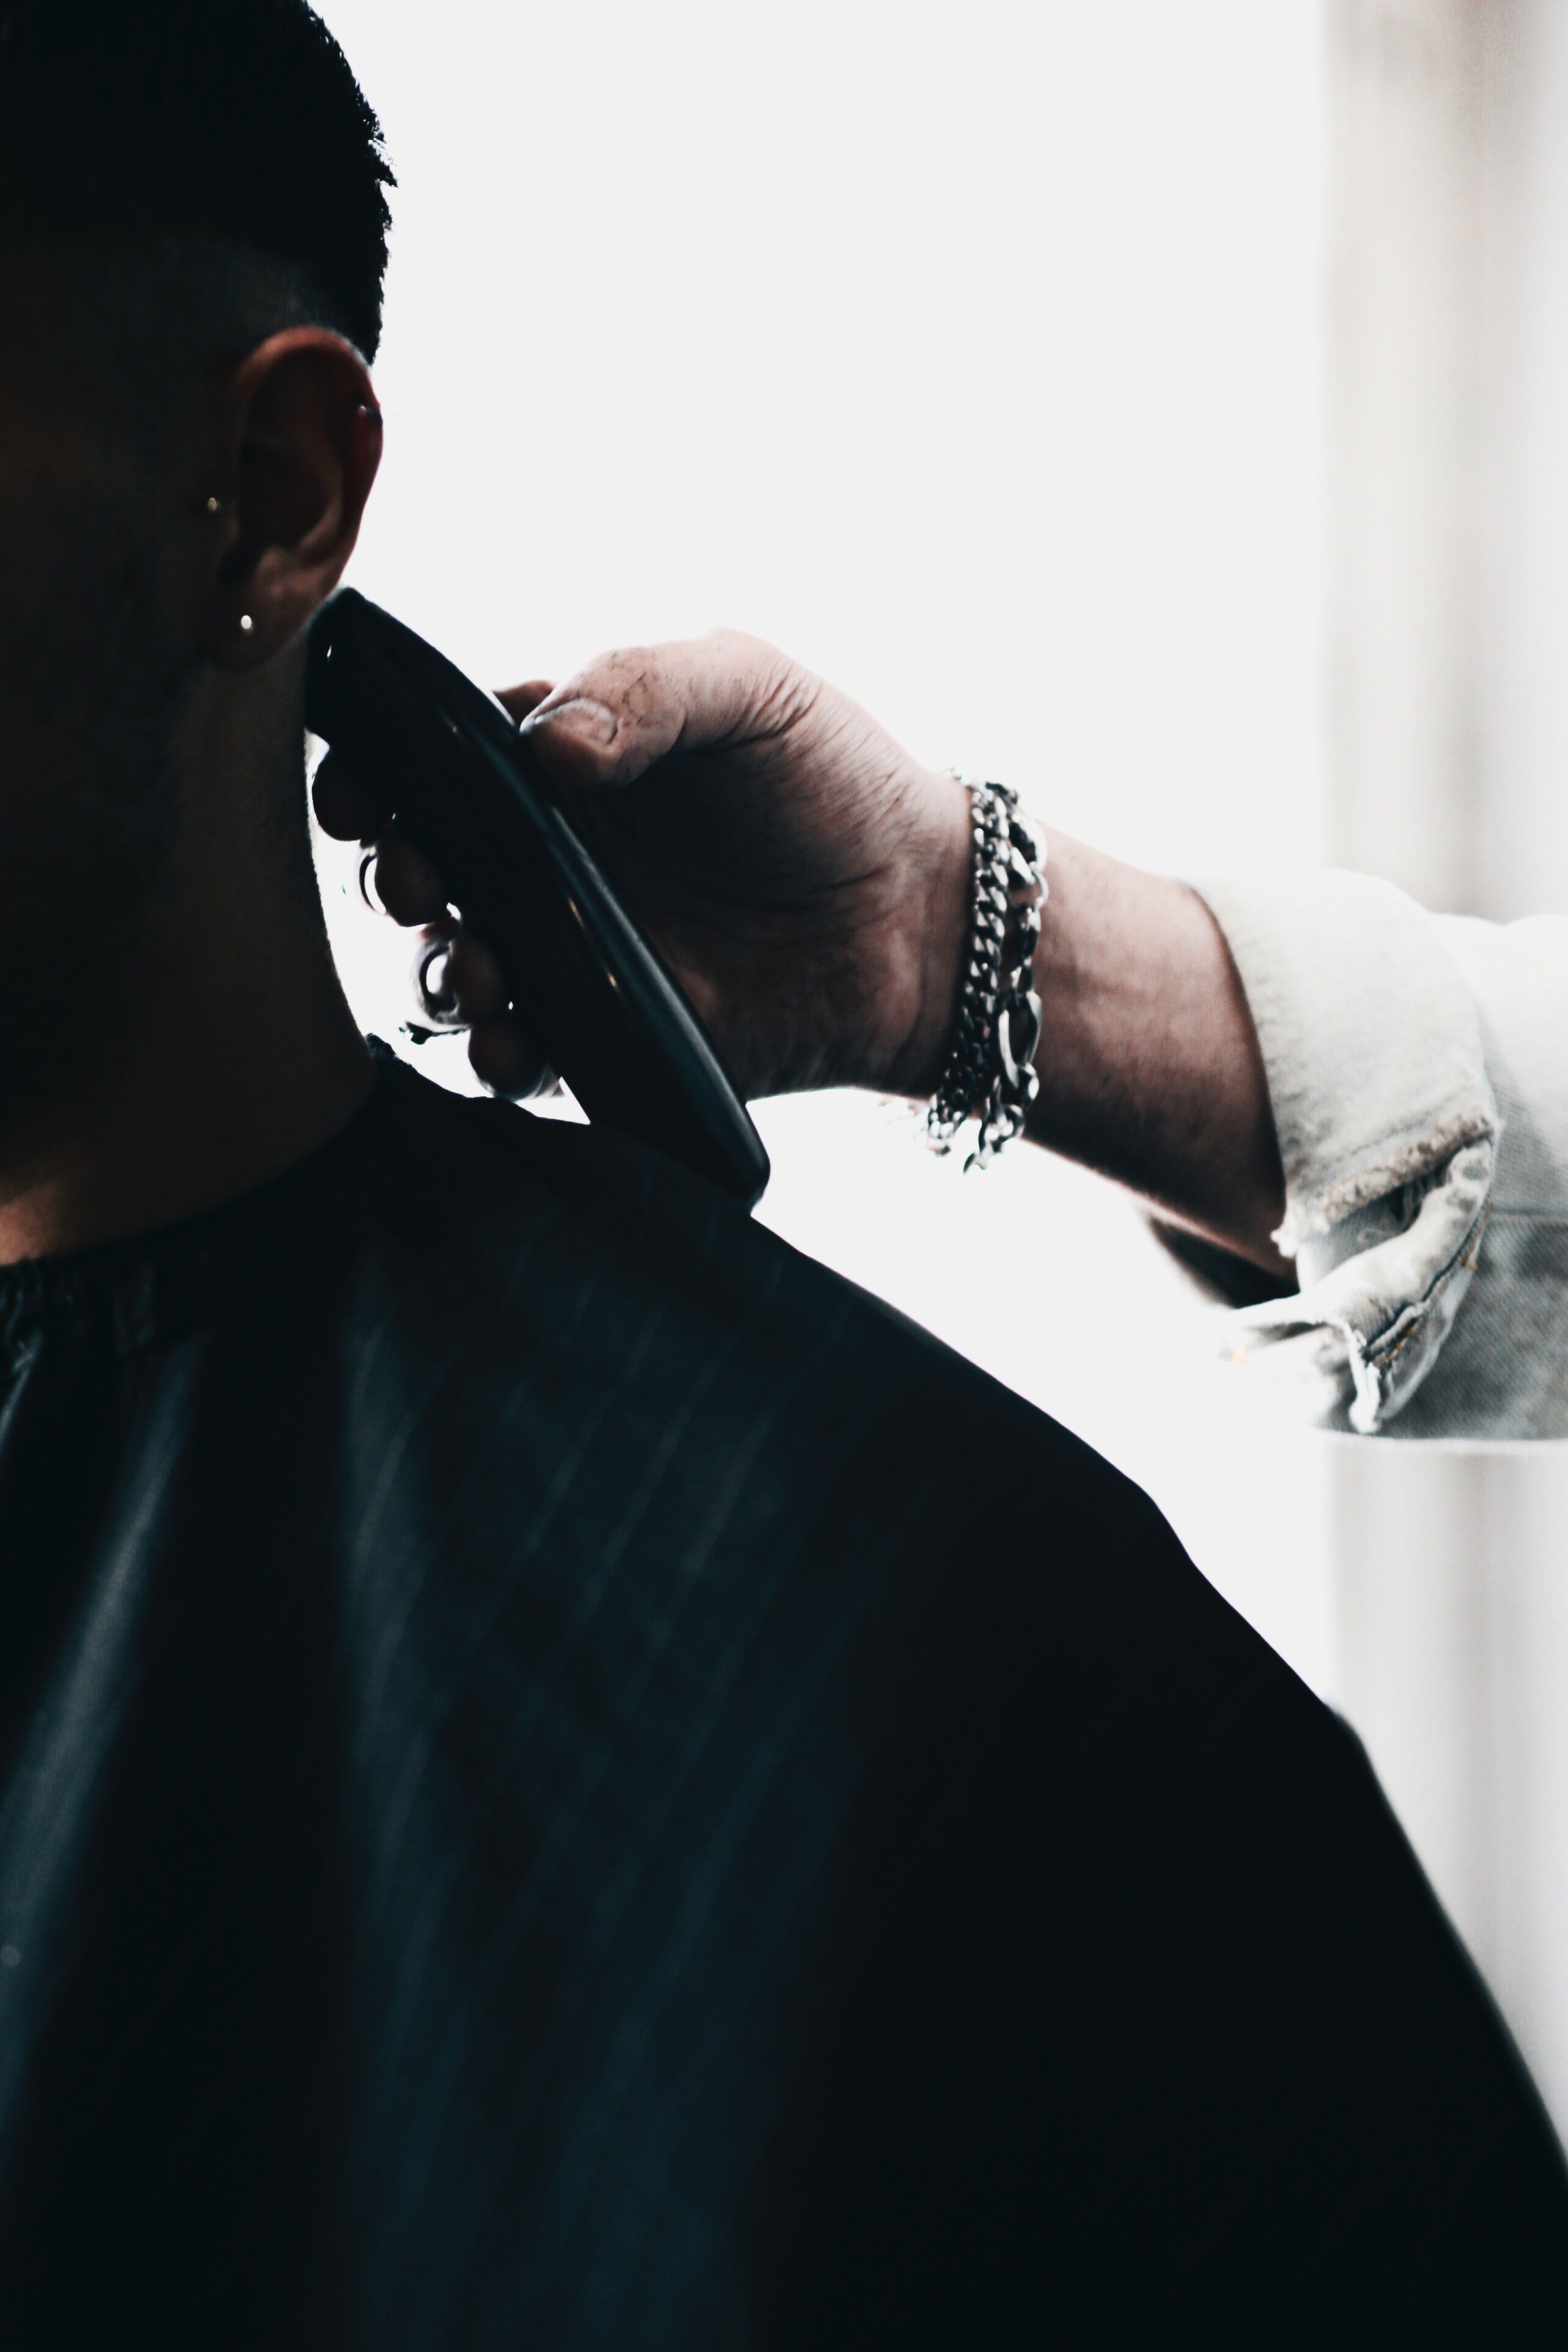 Barber holding a trimmer near a person's head. | Source: Unsplash